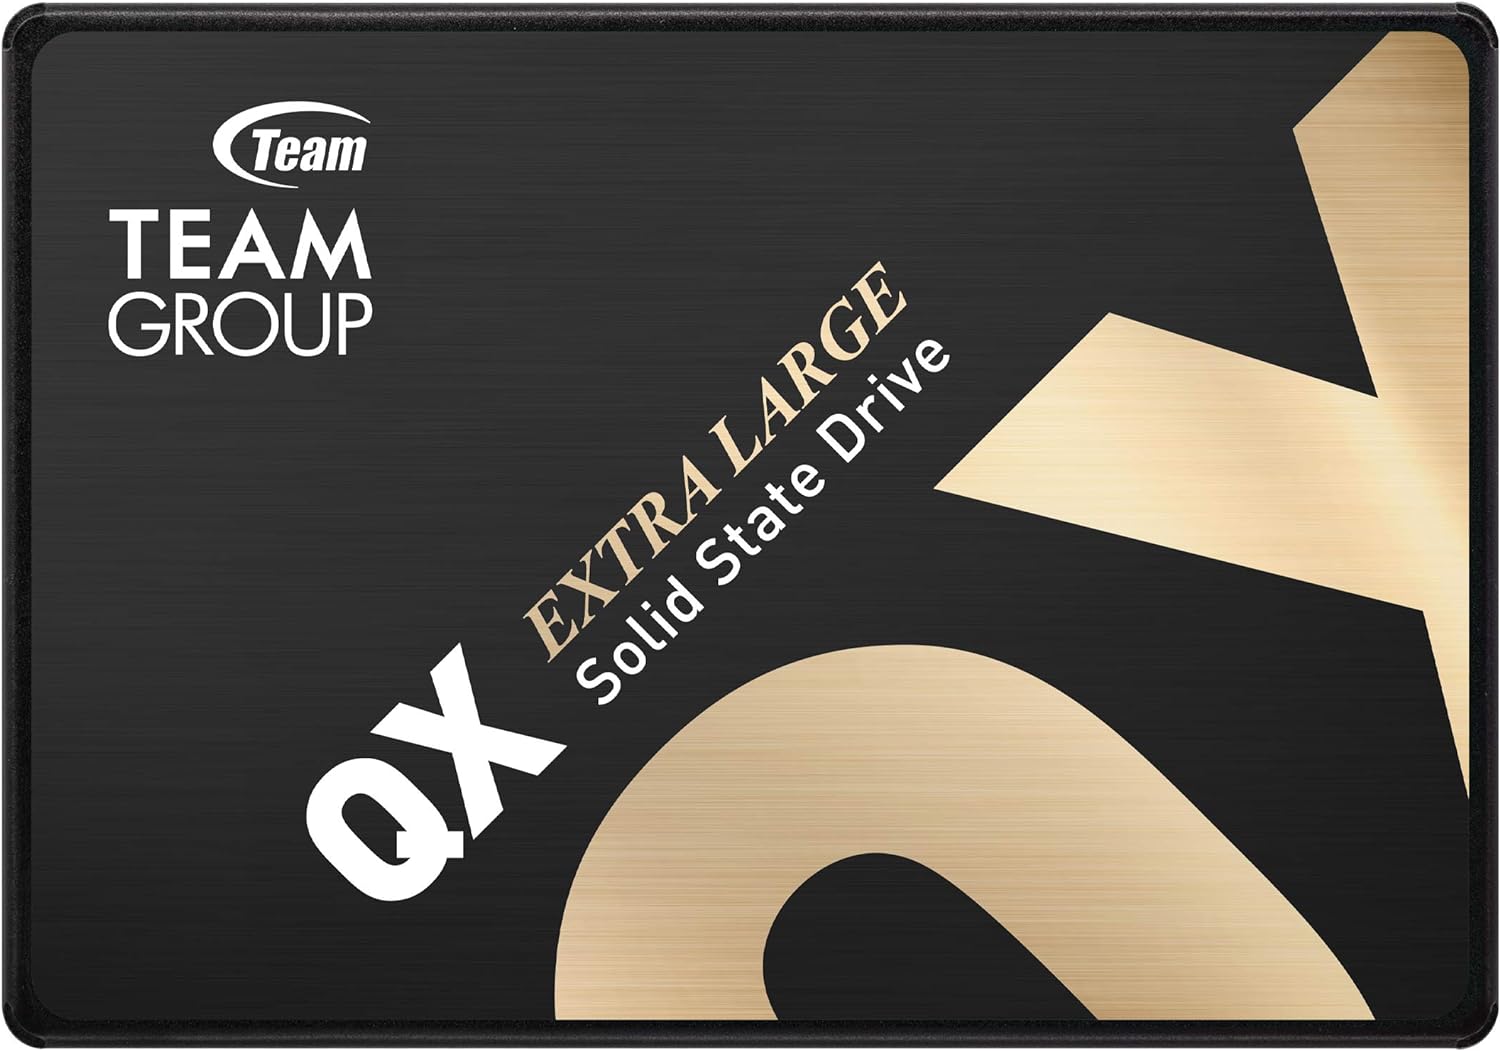 TEAMGROUP QX 2TB 3D NAND QLC 2.5 Inch SATA III Internal Solid State Drive SSD (Read/Write Speed up to 560/500 MB/s) 690TBW Compatible with Laptop  PC Desktop T253X7002T0C101